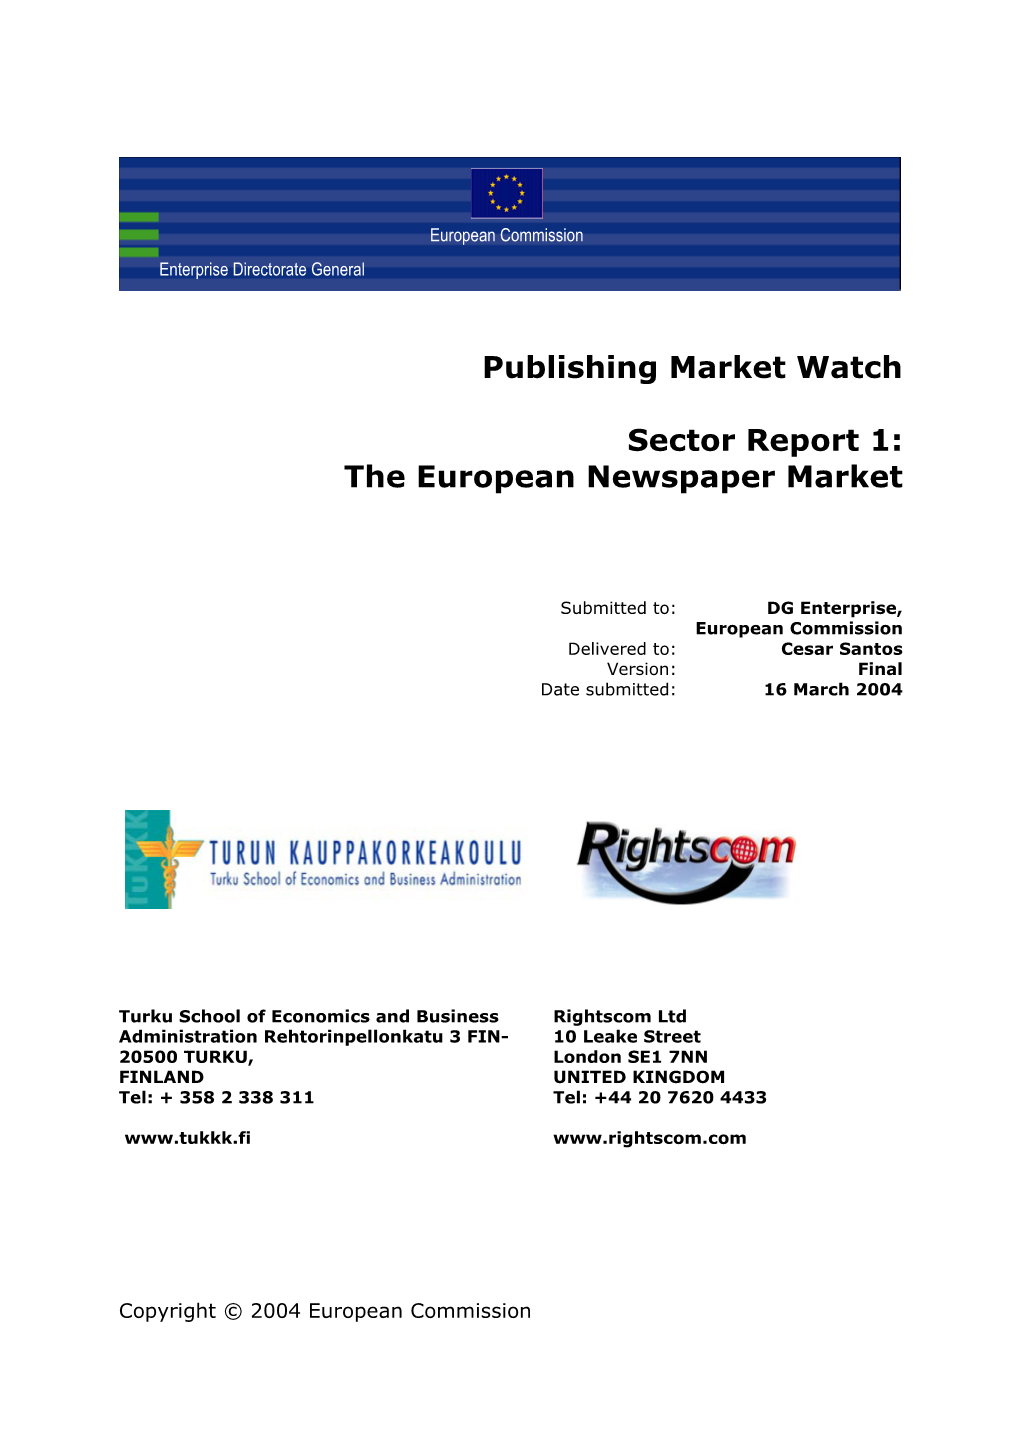 Publishing Market Watch, Sector Report 1: the European Newspaper Market. 16 March 2004